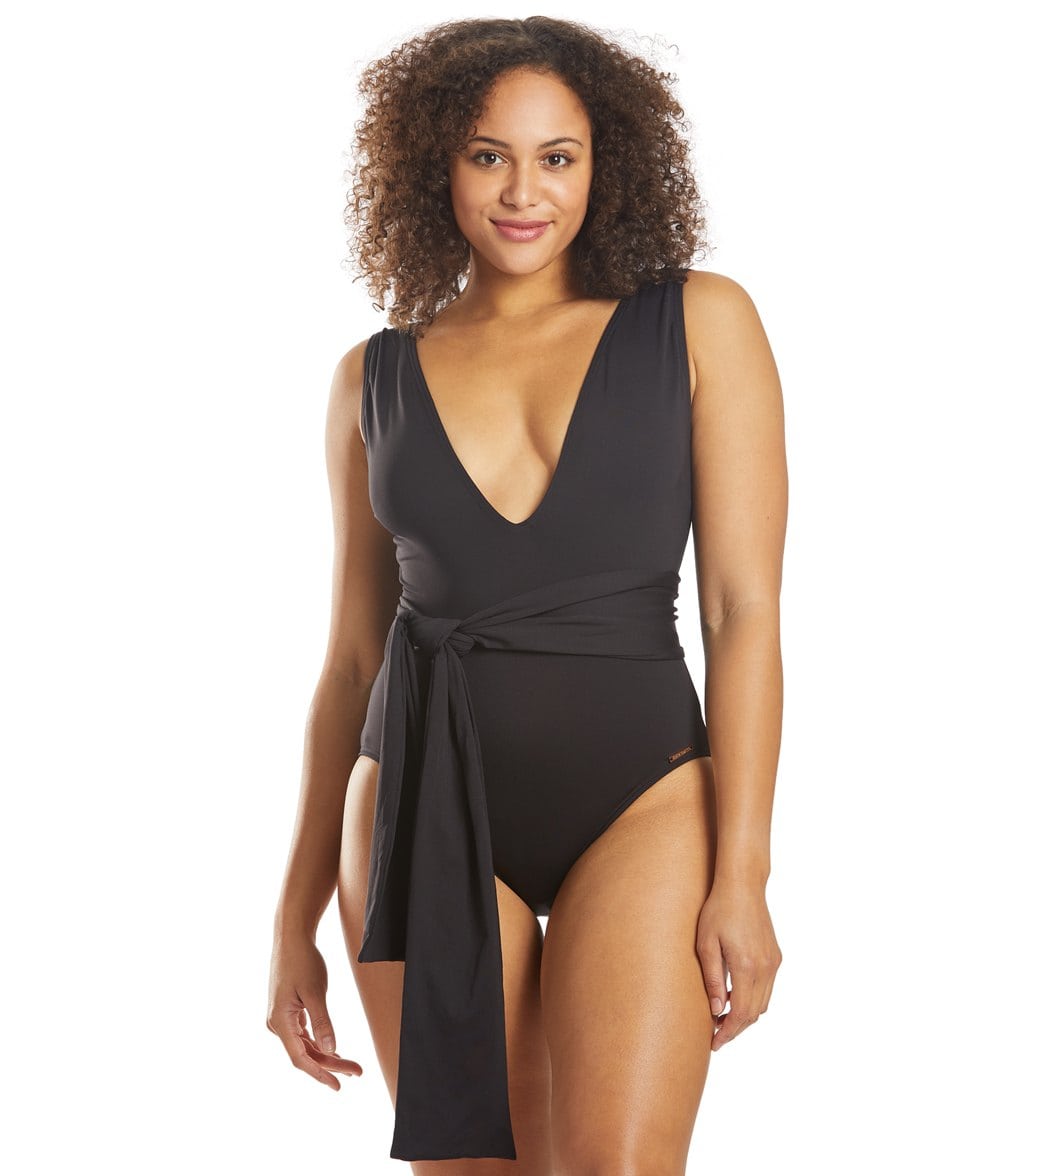 Vince Camuto Tropic Tones Belted Plunge One Piece Swimsuit - Black 10 - Swimoutlet.com